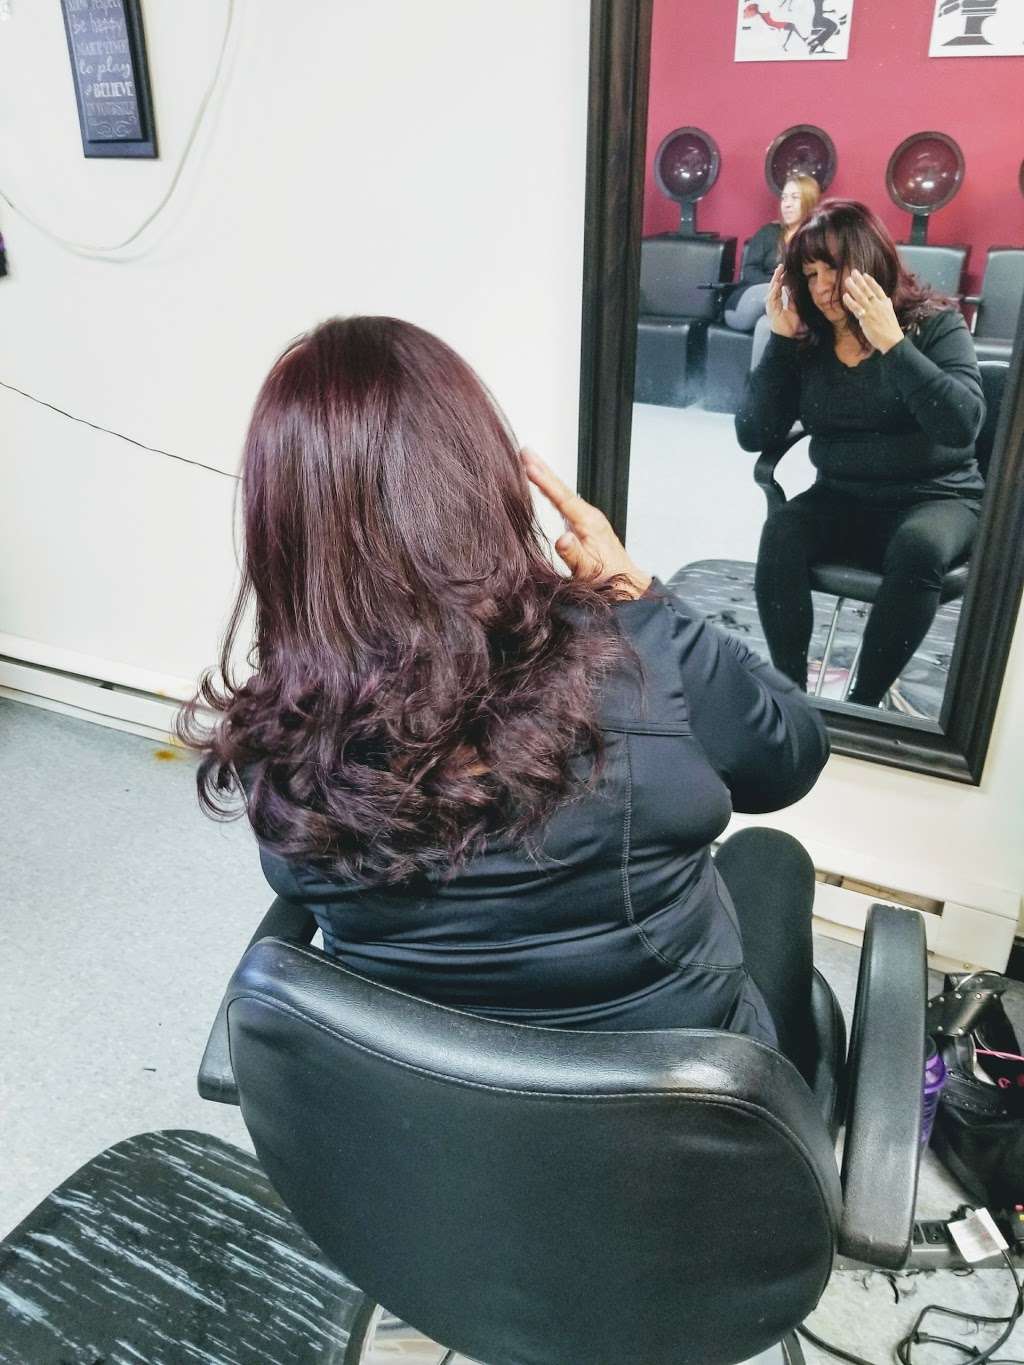 Mahagany Hair Salon: Dominican Stylist | 106 Columbia Dr Suite 5, East Stroudsburg, PA 18301, USA | Phone: (570) 872-9101